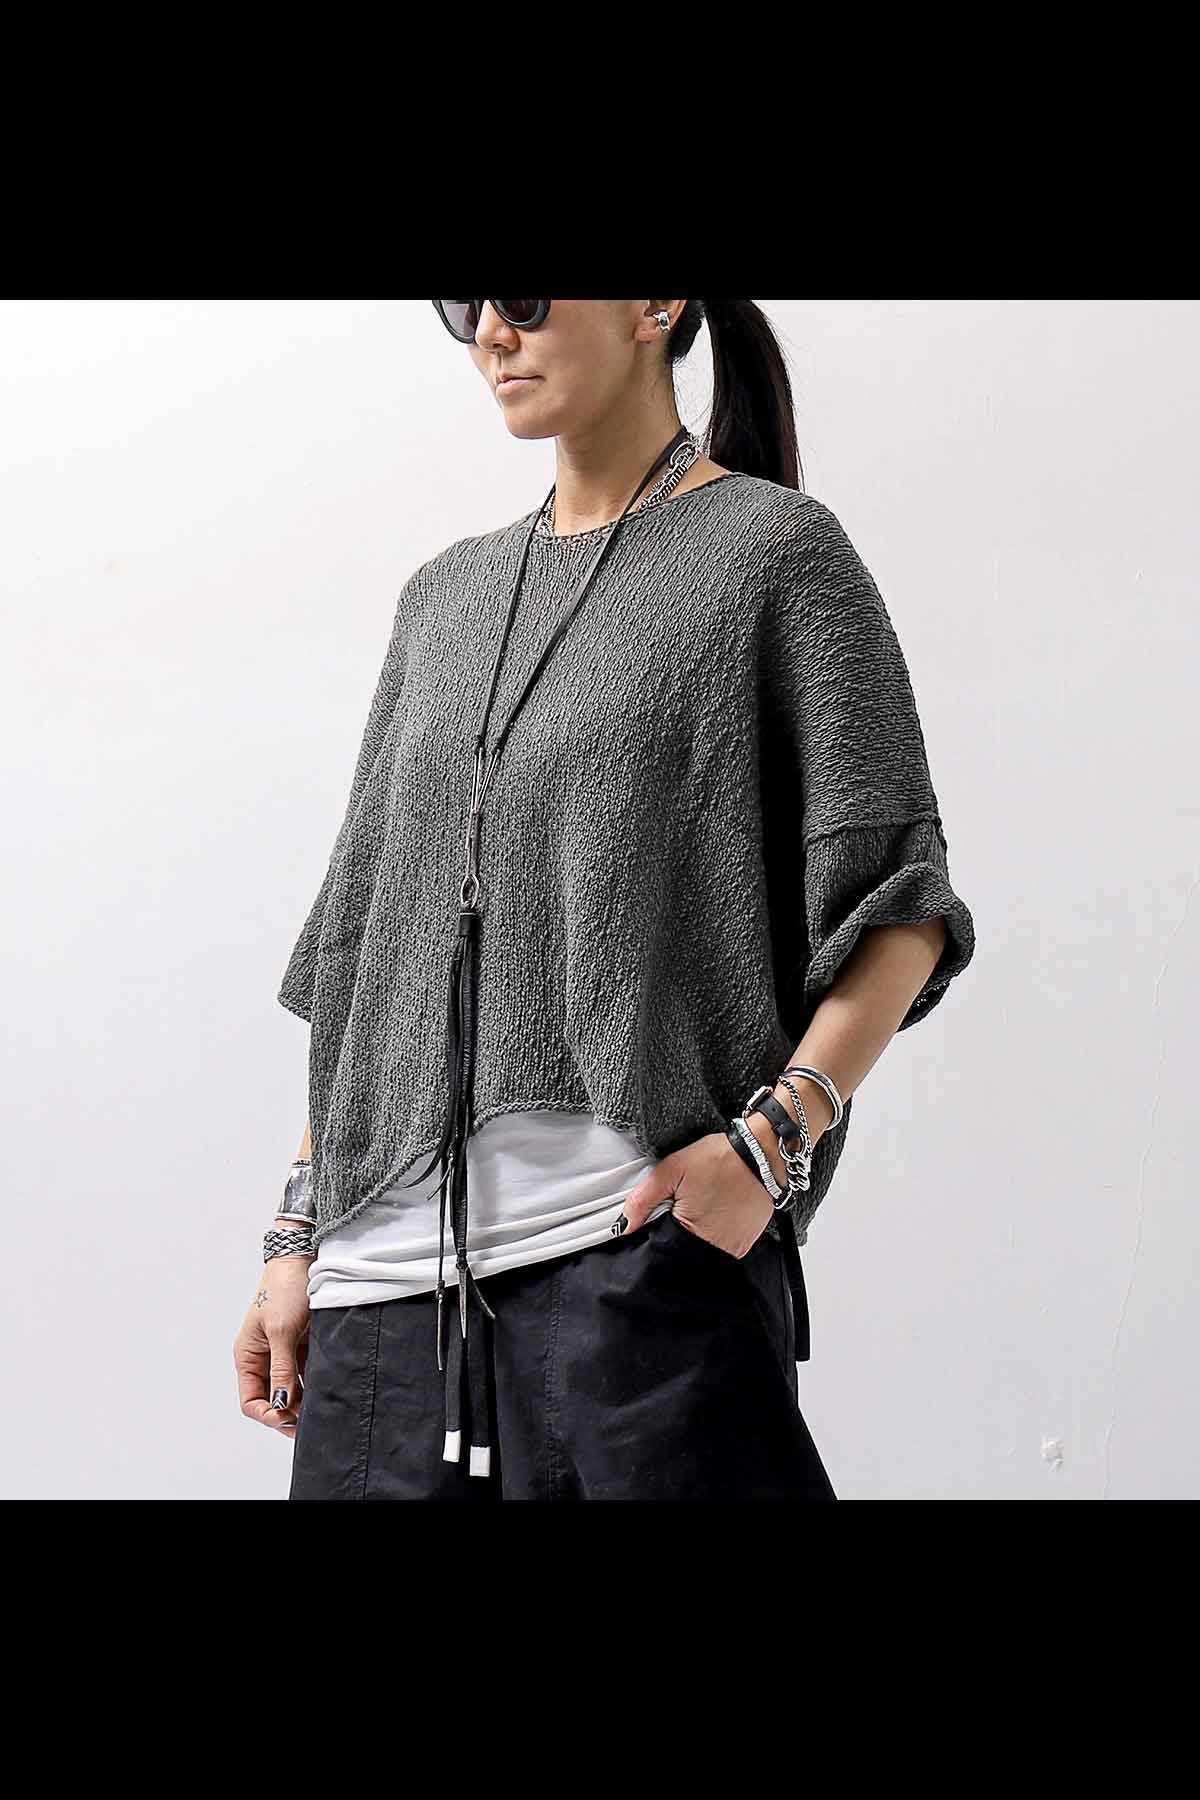 <img class='new_mark_img1' src='https://img.shop-pro.jp/img/new/icons8.gif' style='border:none;display:inline;margin:0px;padding:0px;width:auto;' />UNISEX COTTON LINEN KNIT HALF-SLEEVE TOP BZB1636_SMOKE GREEN